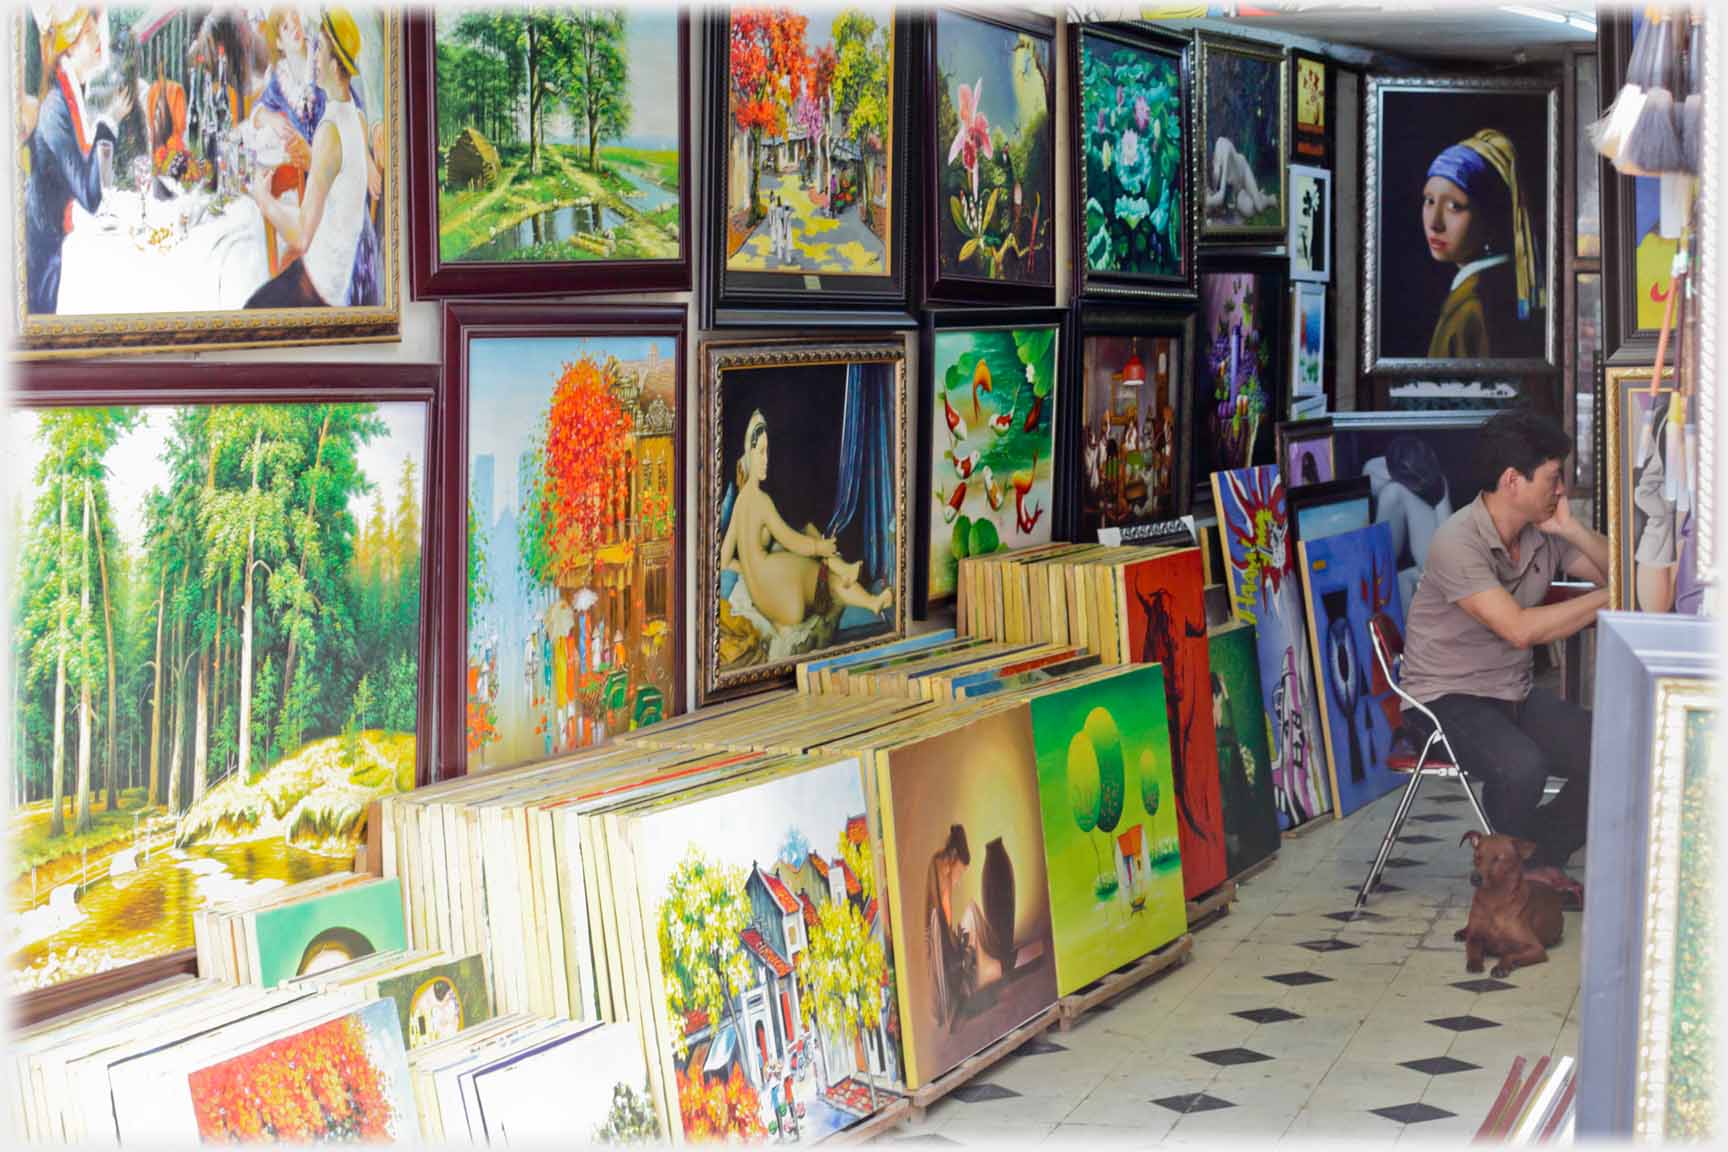 Looking into wall of shop covered in paintings, paintings stacked along floor and man sitting.